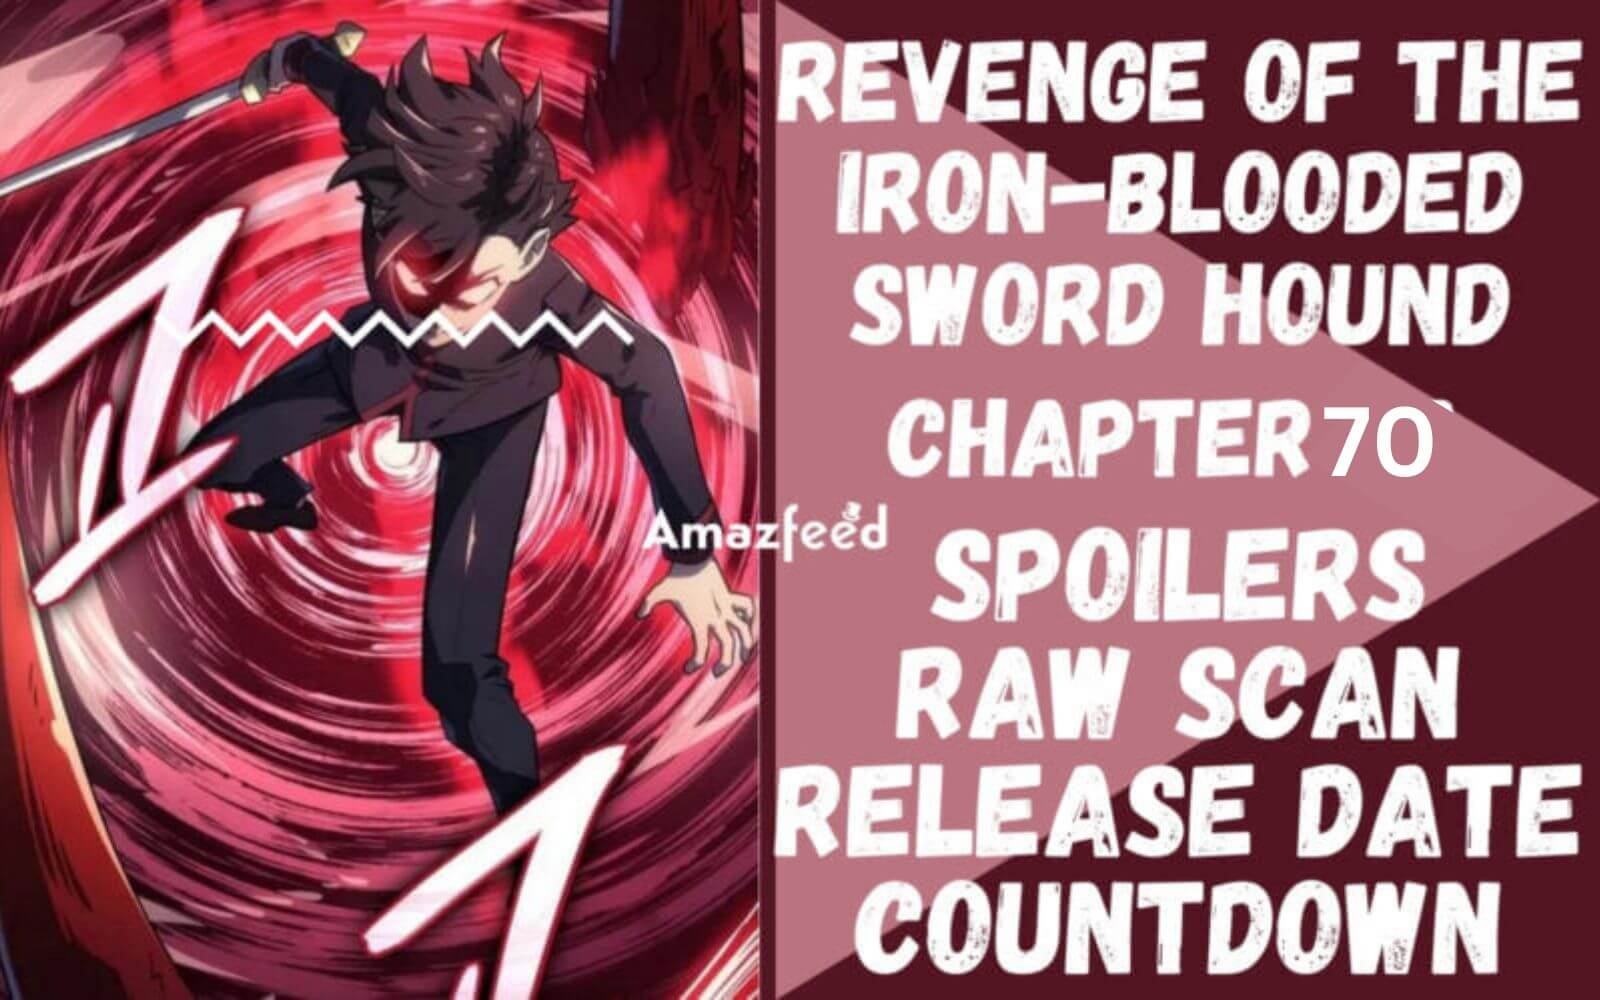 Revenge of the Iron-Blooded Sword Hound Chapter 70